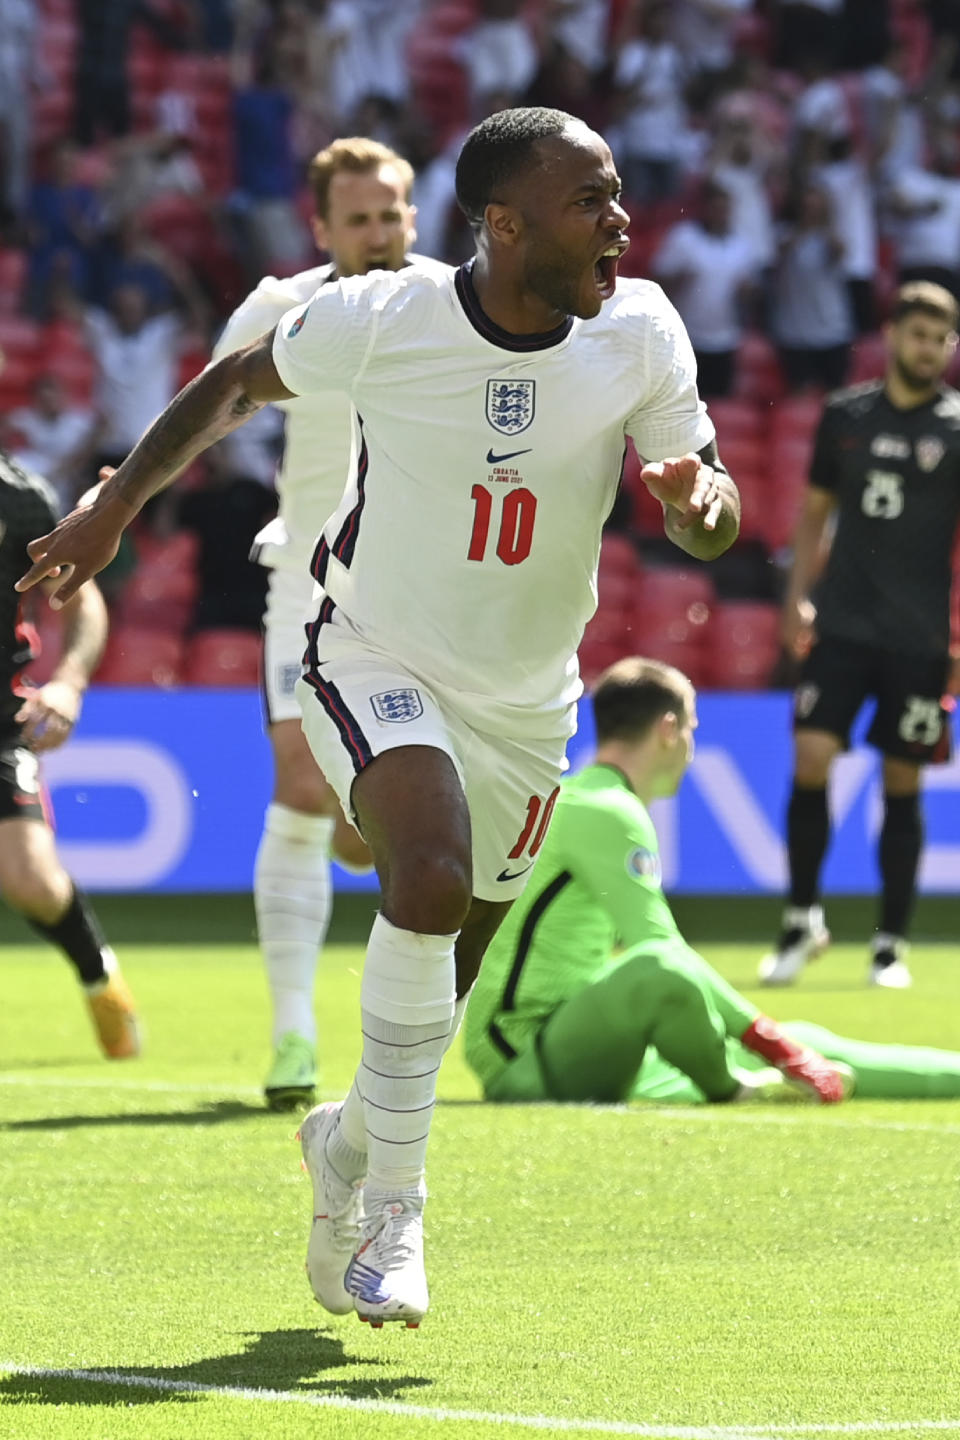 England's Raheem Sterling celebrates after scoring his side's opening goal during the Euro 2020 soccer championship group D match between England and Croatia at Wembley stadium in London, Sunday, June 13, 2021. (Glyn Kirk/Pool Photo via AP)